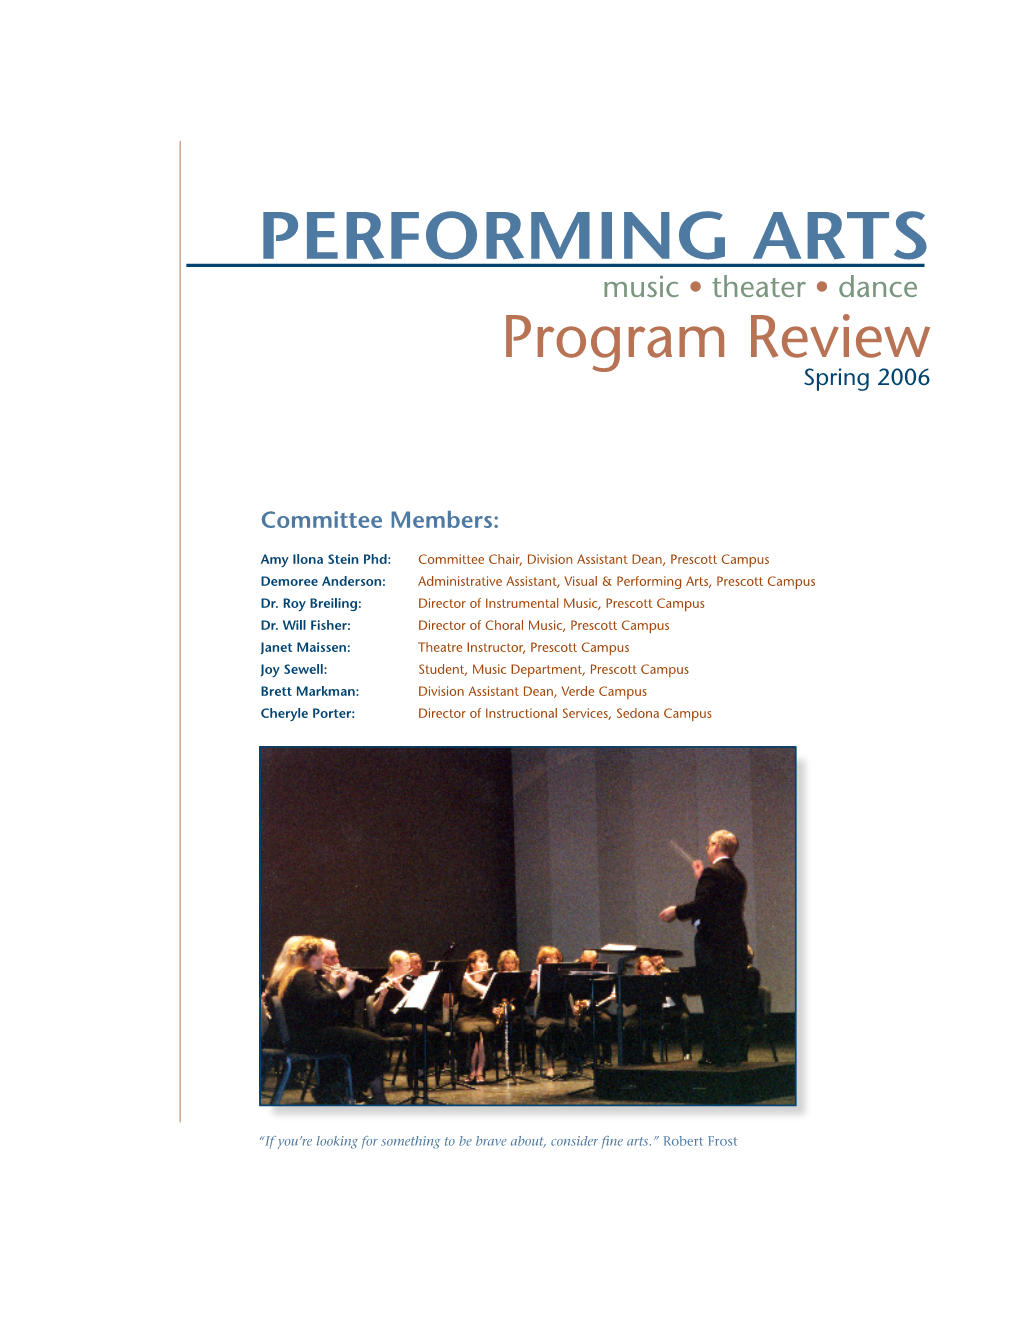 PERFORMING ARTS Music • Theater • Dance Program Review Spring 2006